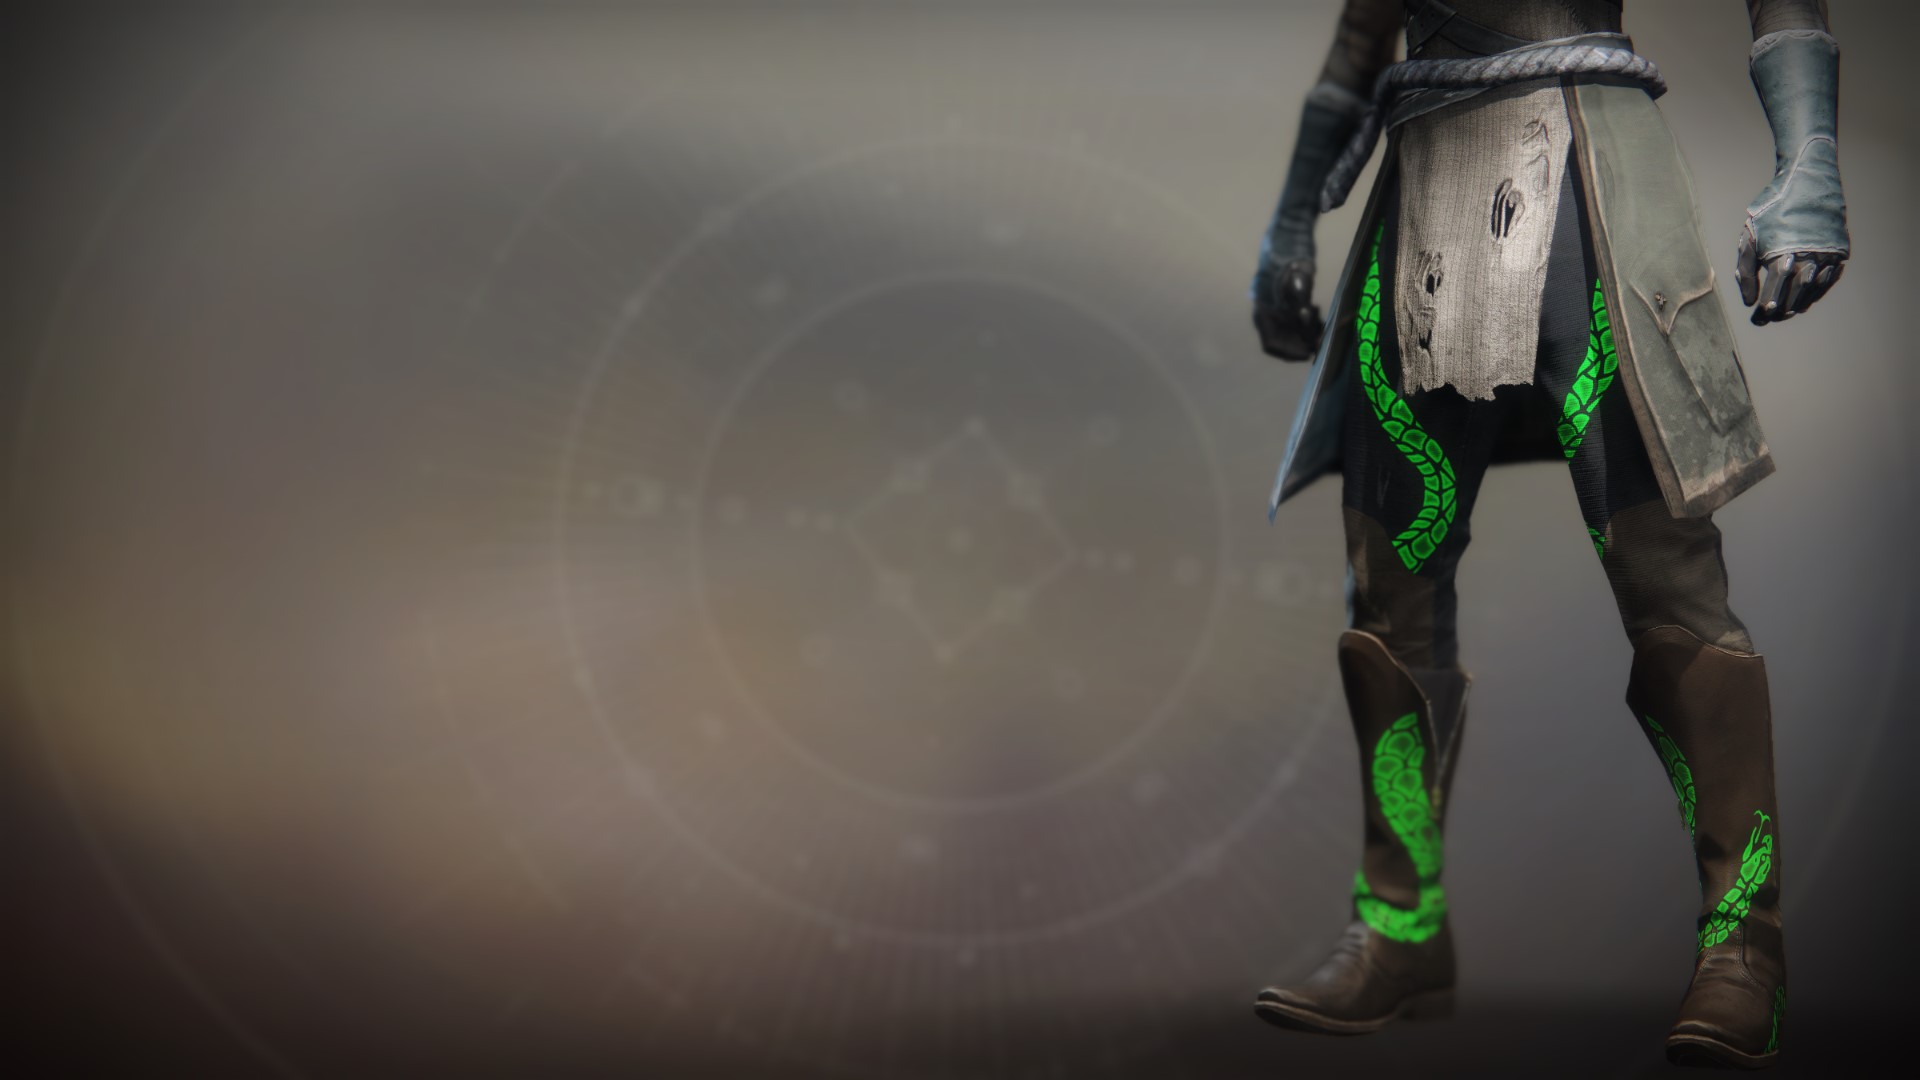 An in-game render of the Illicit Reaper Boots.